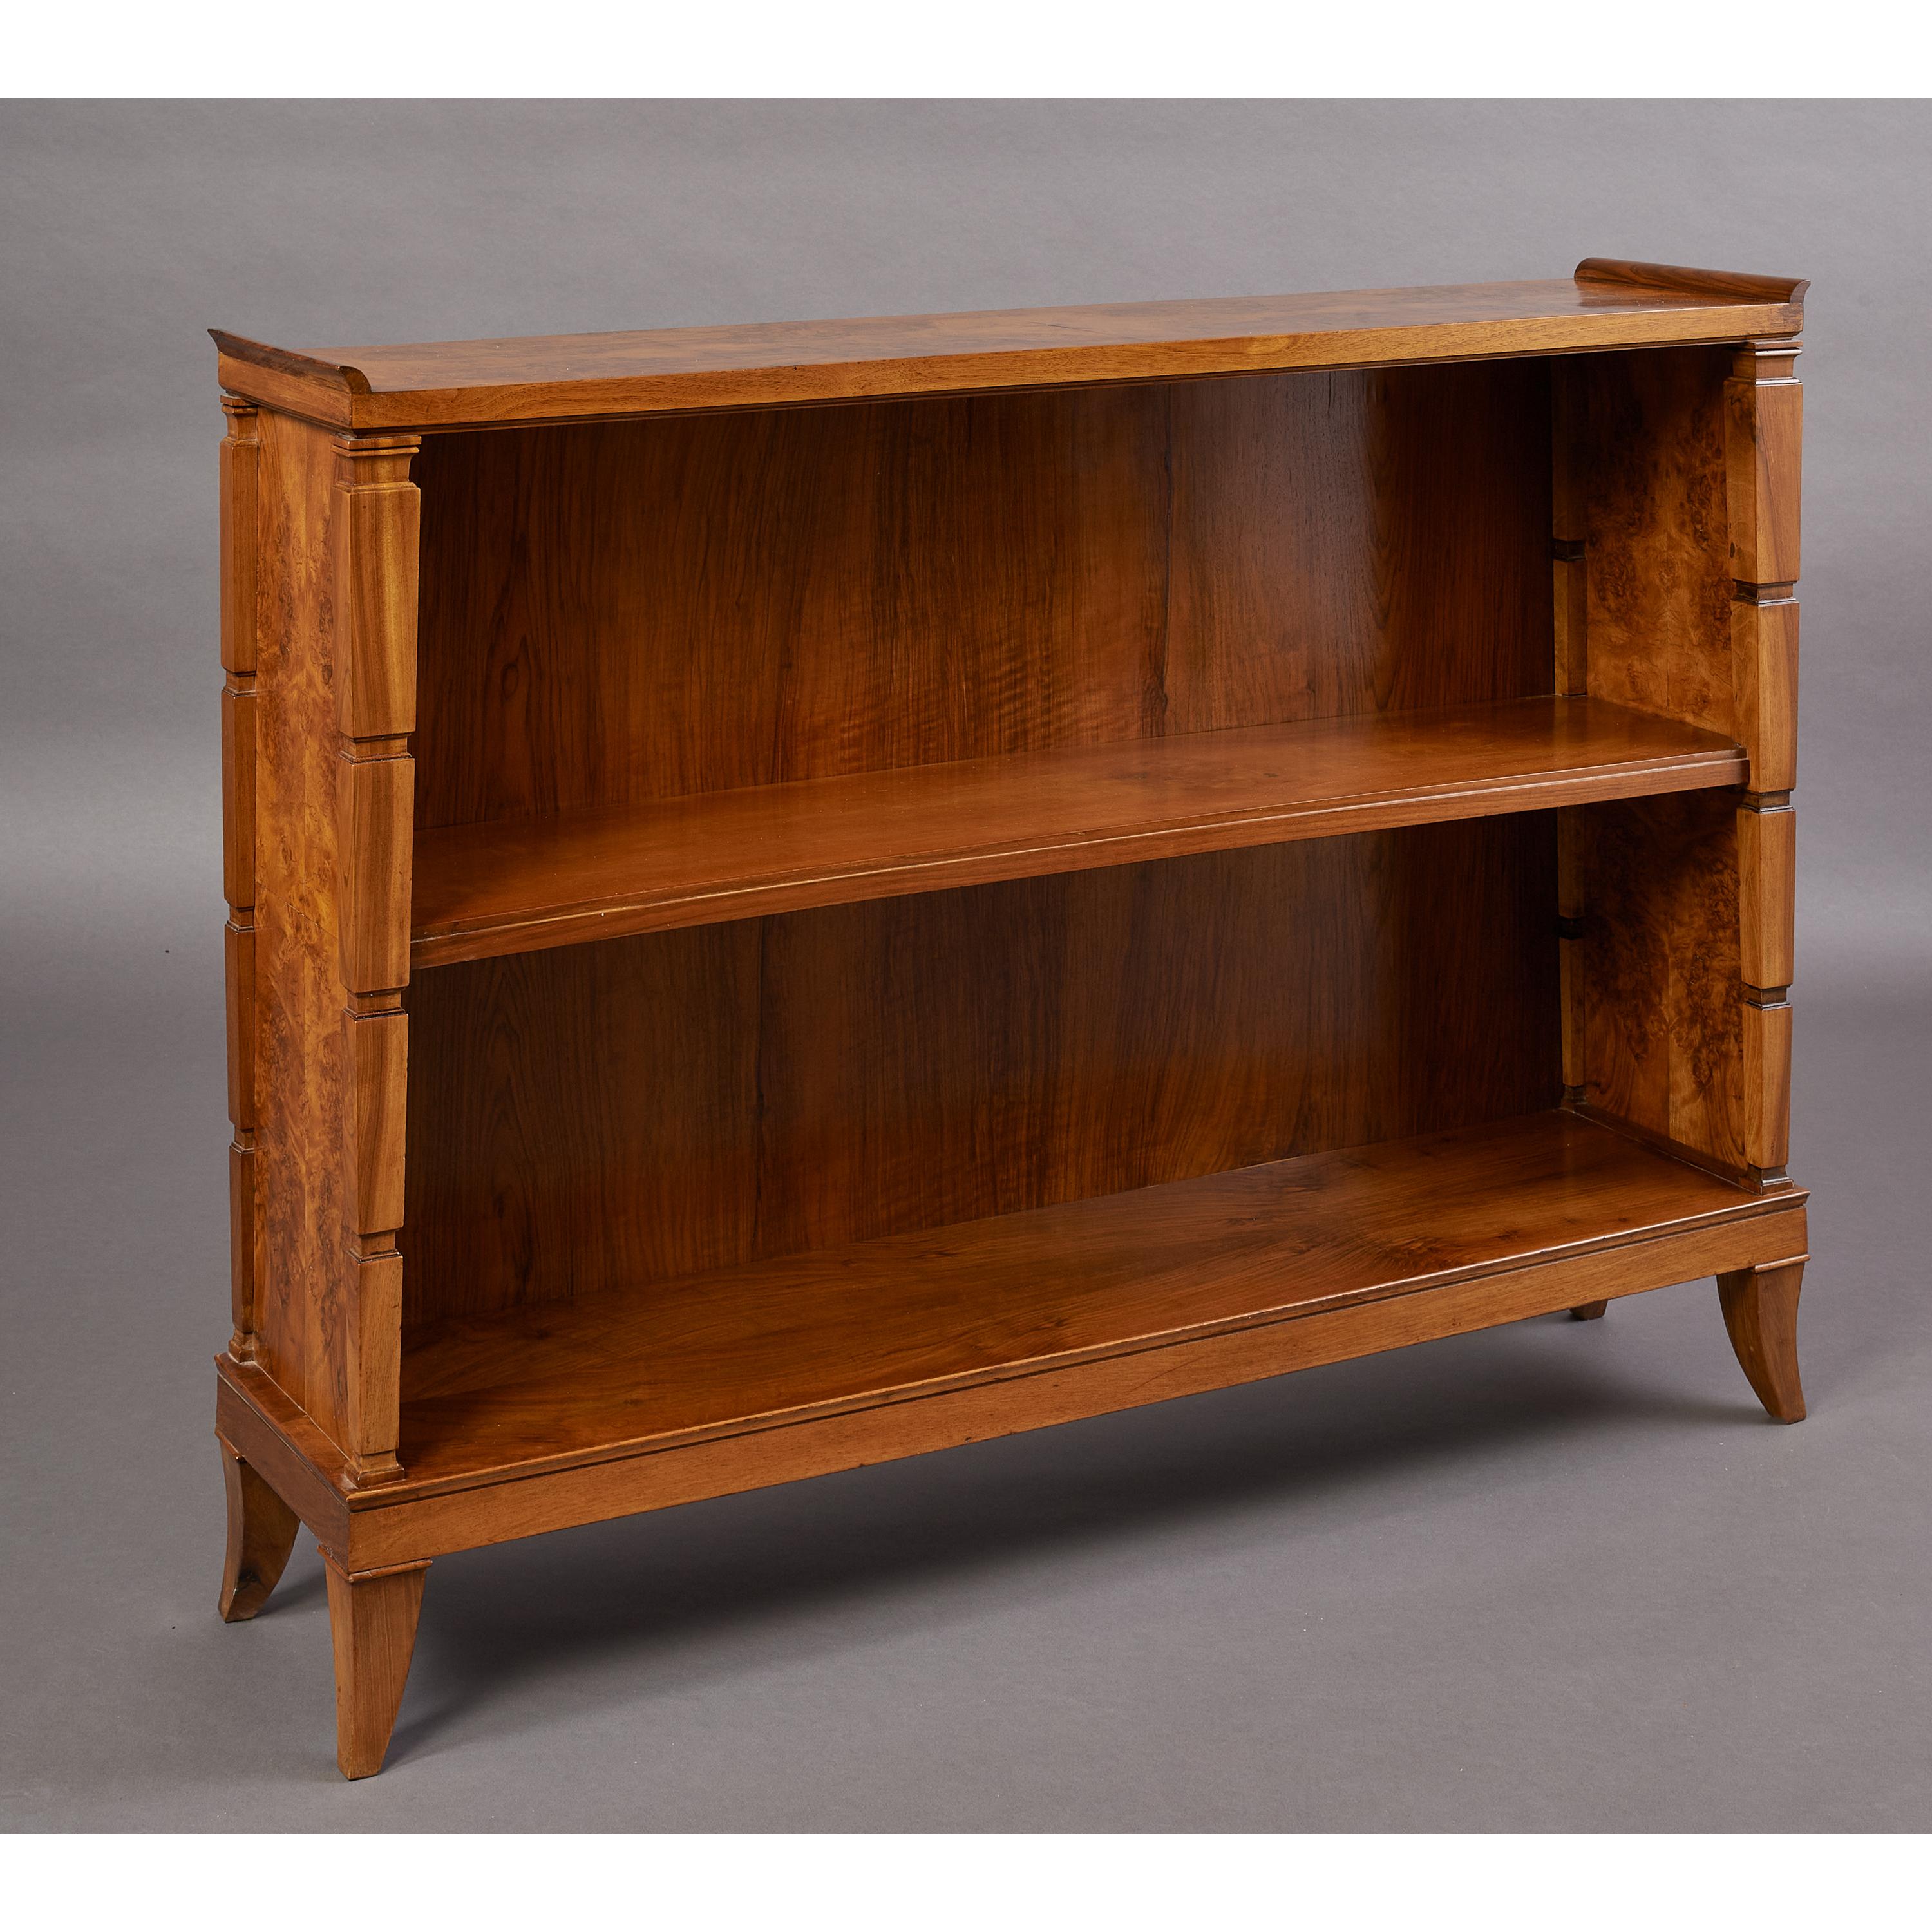 ITALY, 1940's
School of Gio Ponti and Emilio Lancia
Exquisite walnut and burl display cabinet or bookcase
with wonderfully articulated side columns and curved legs 
Elegant design that can fit a Modern or Neo Classical Interior
51 W X 11.5 D x 37 H